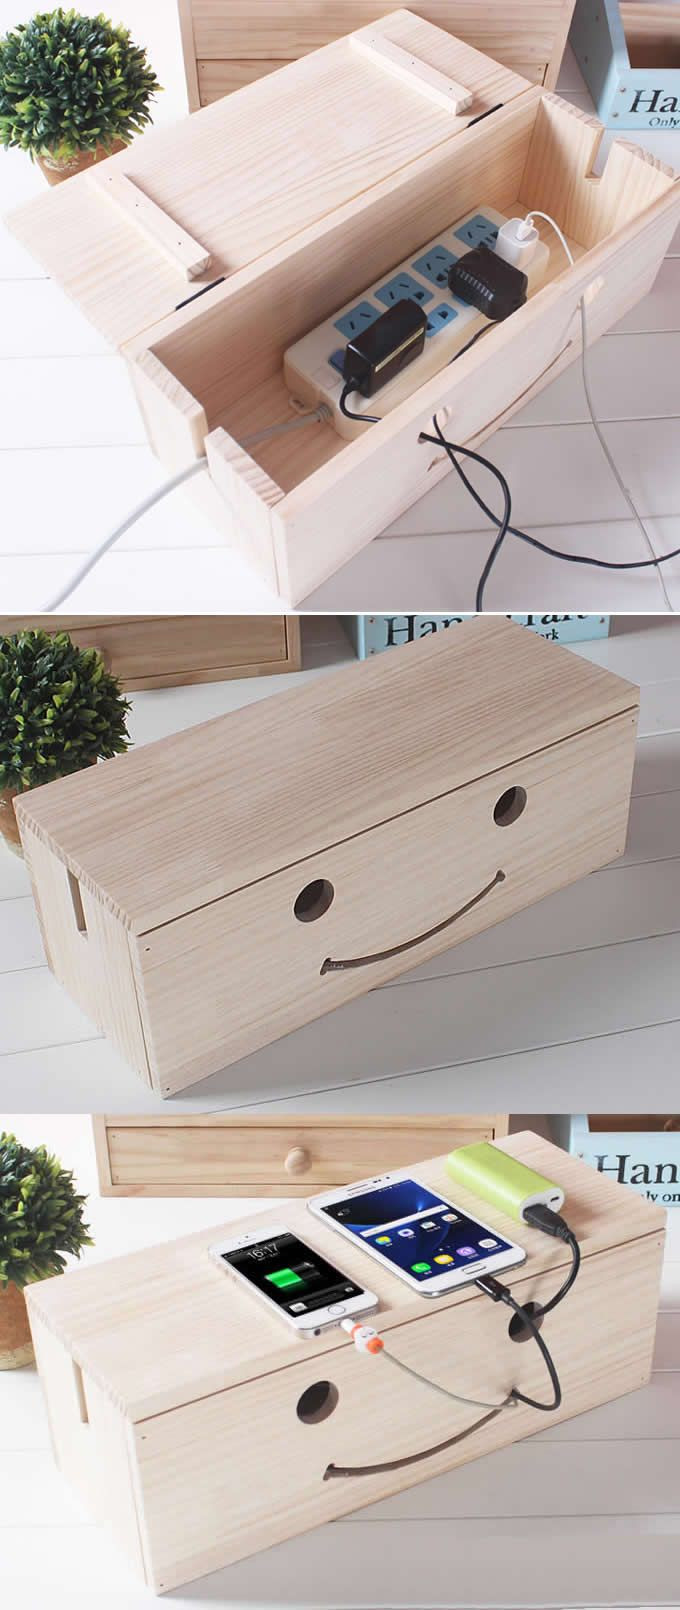 DIY Cable Management Box
 Wooden Cable Cord Organizer Box CableBox Cable Management